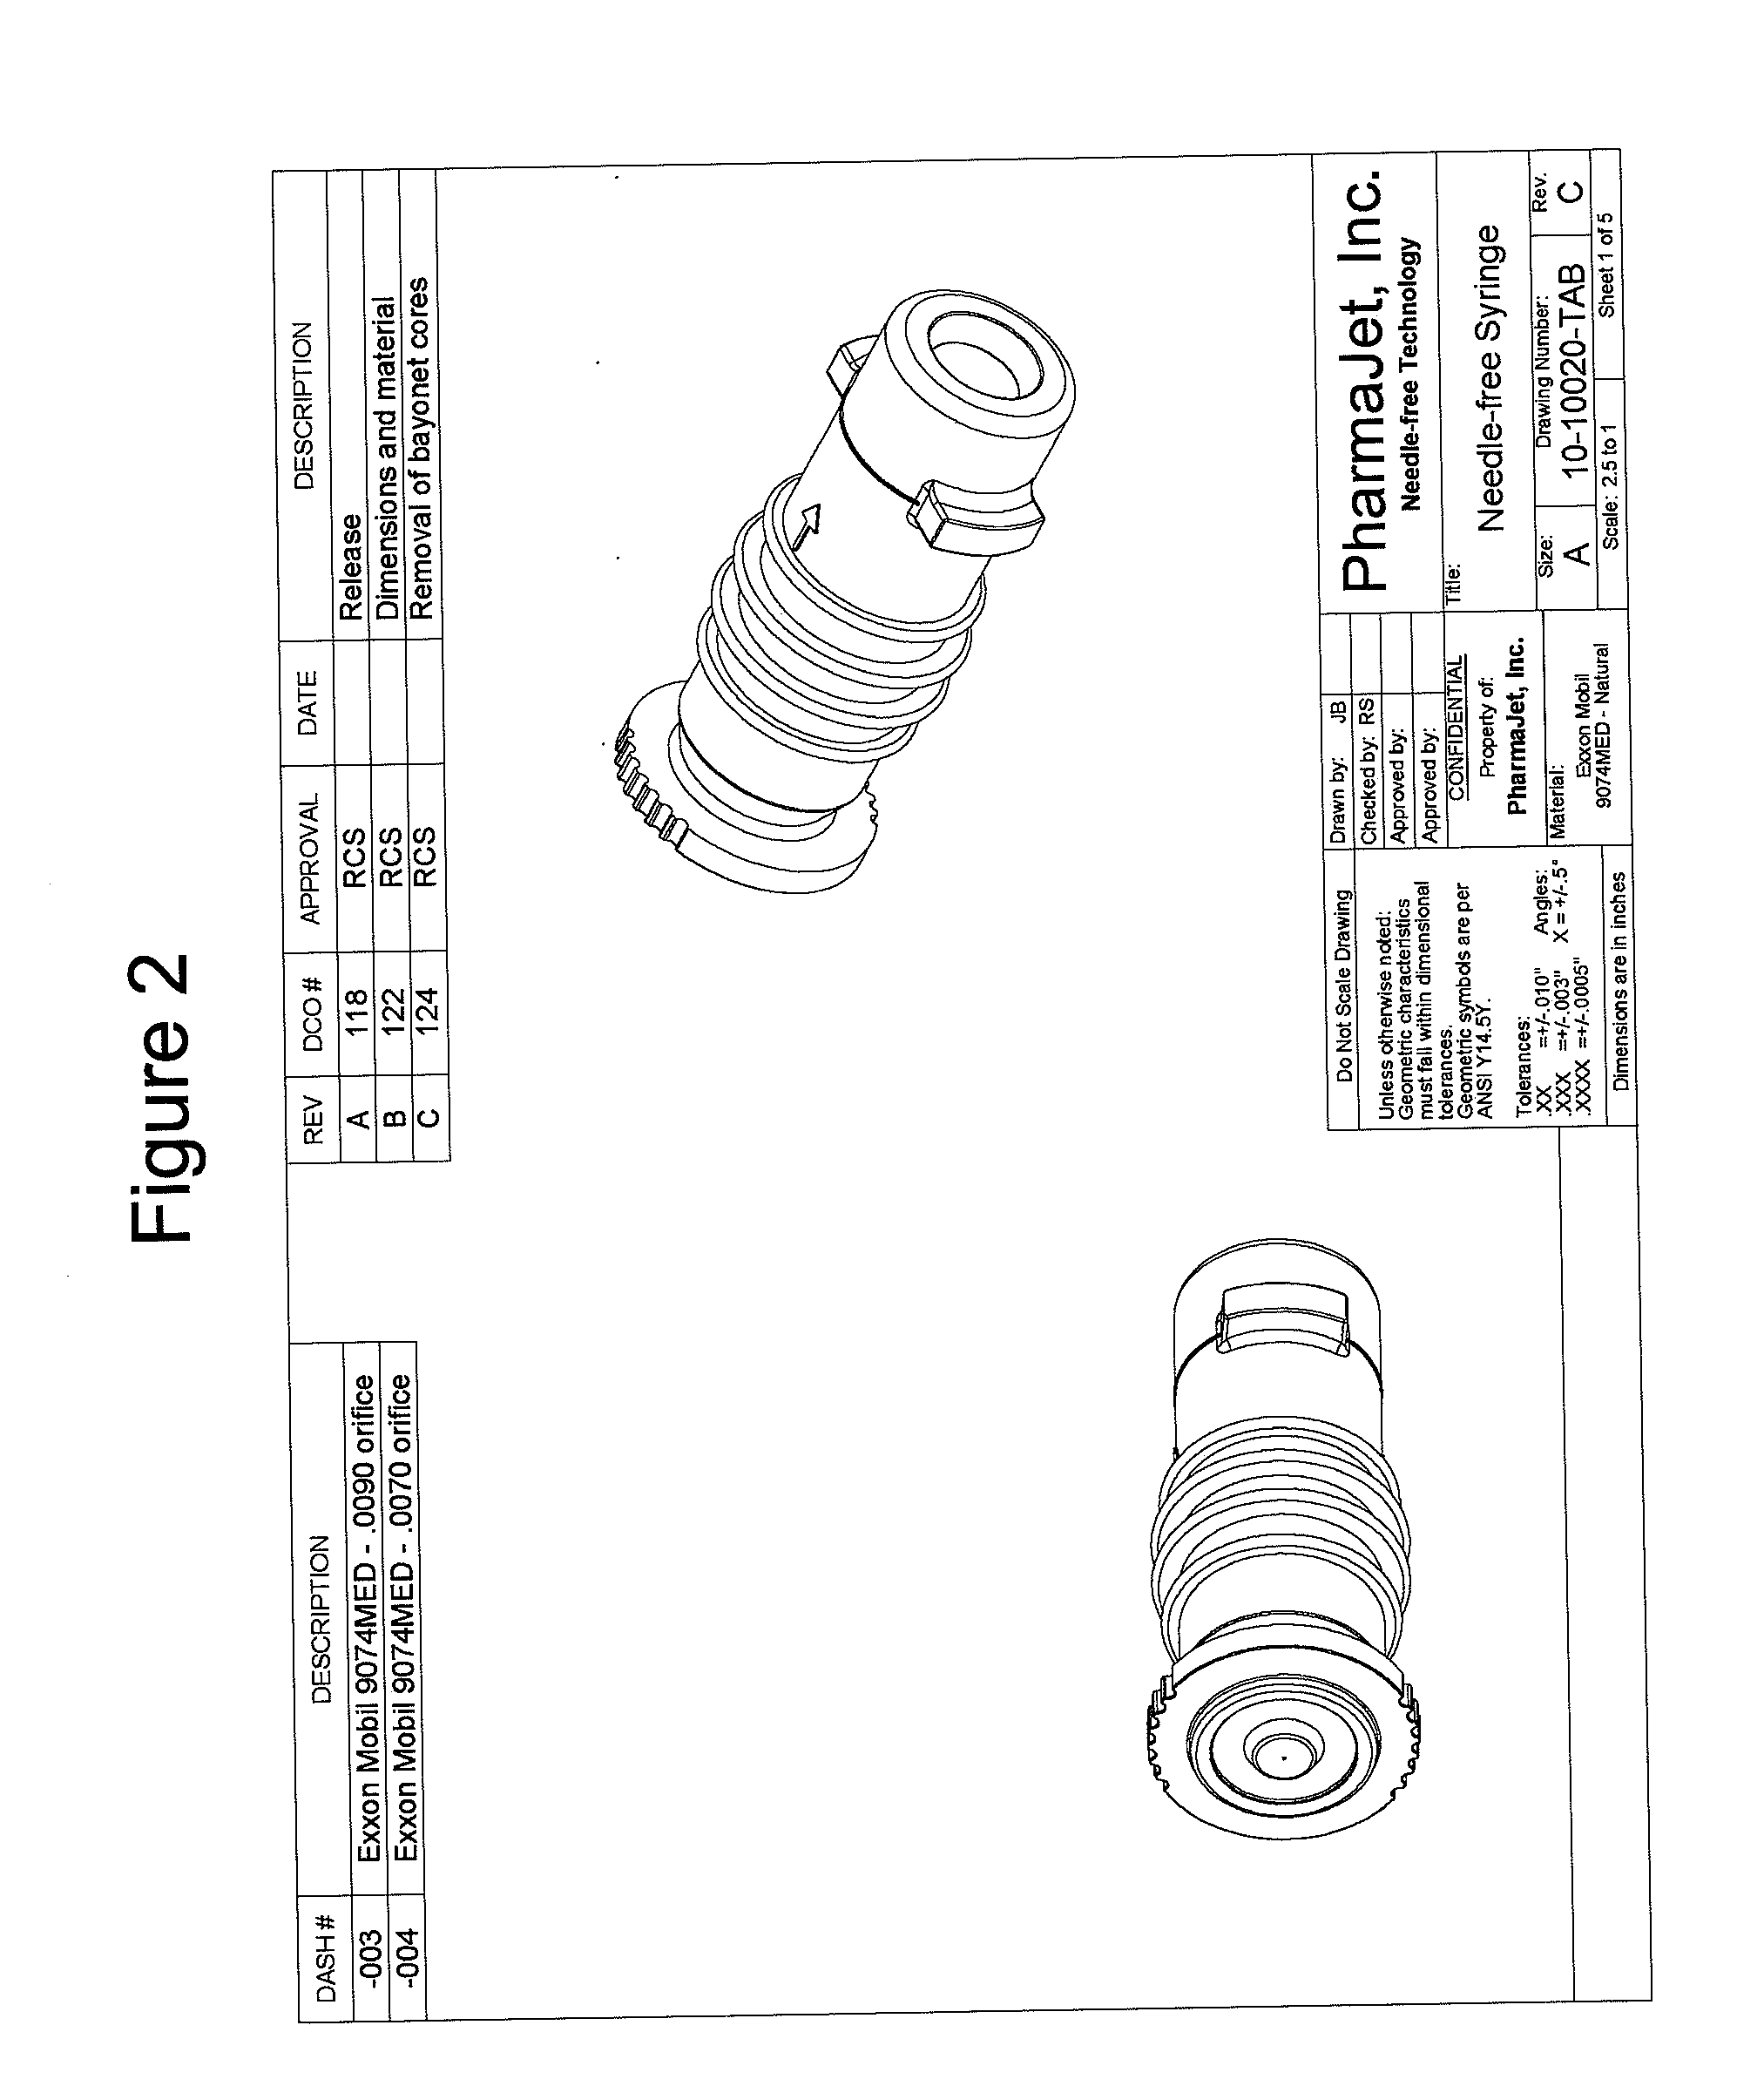 Intradermal injector and uses thereof